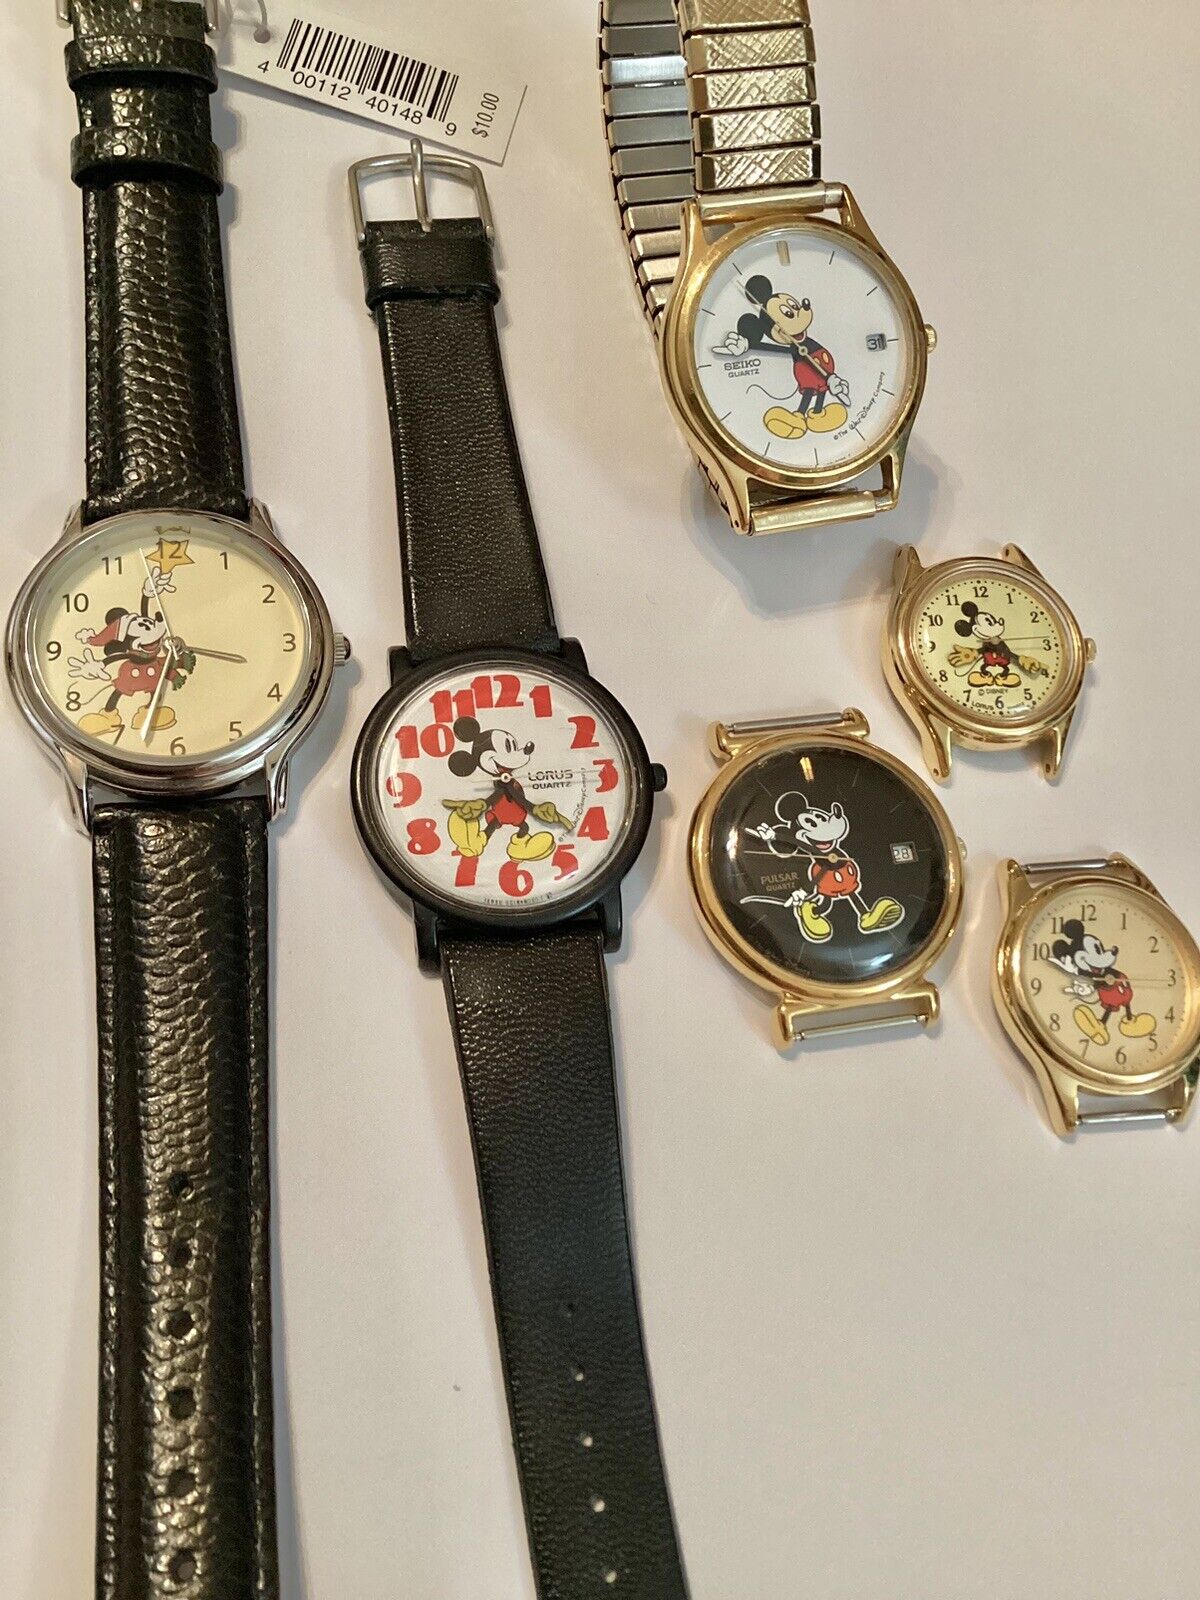 Lot of 6 Mickey Mouse Watches / Watch Faces Seiko Pulsar Lorus Disney AS IS